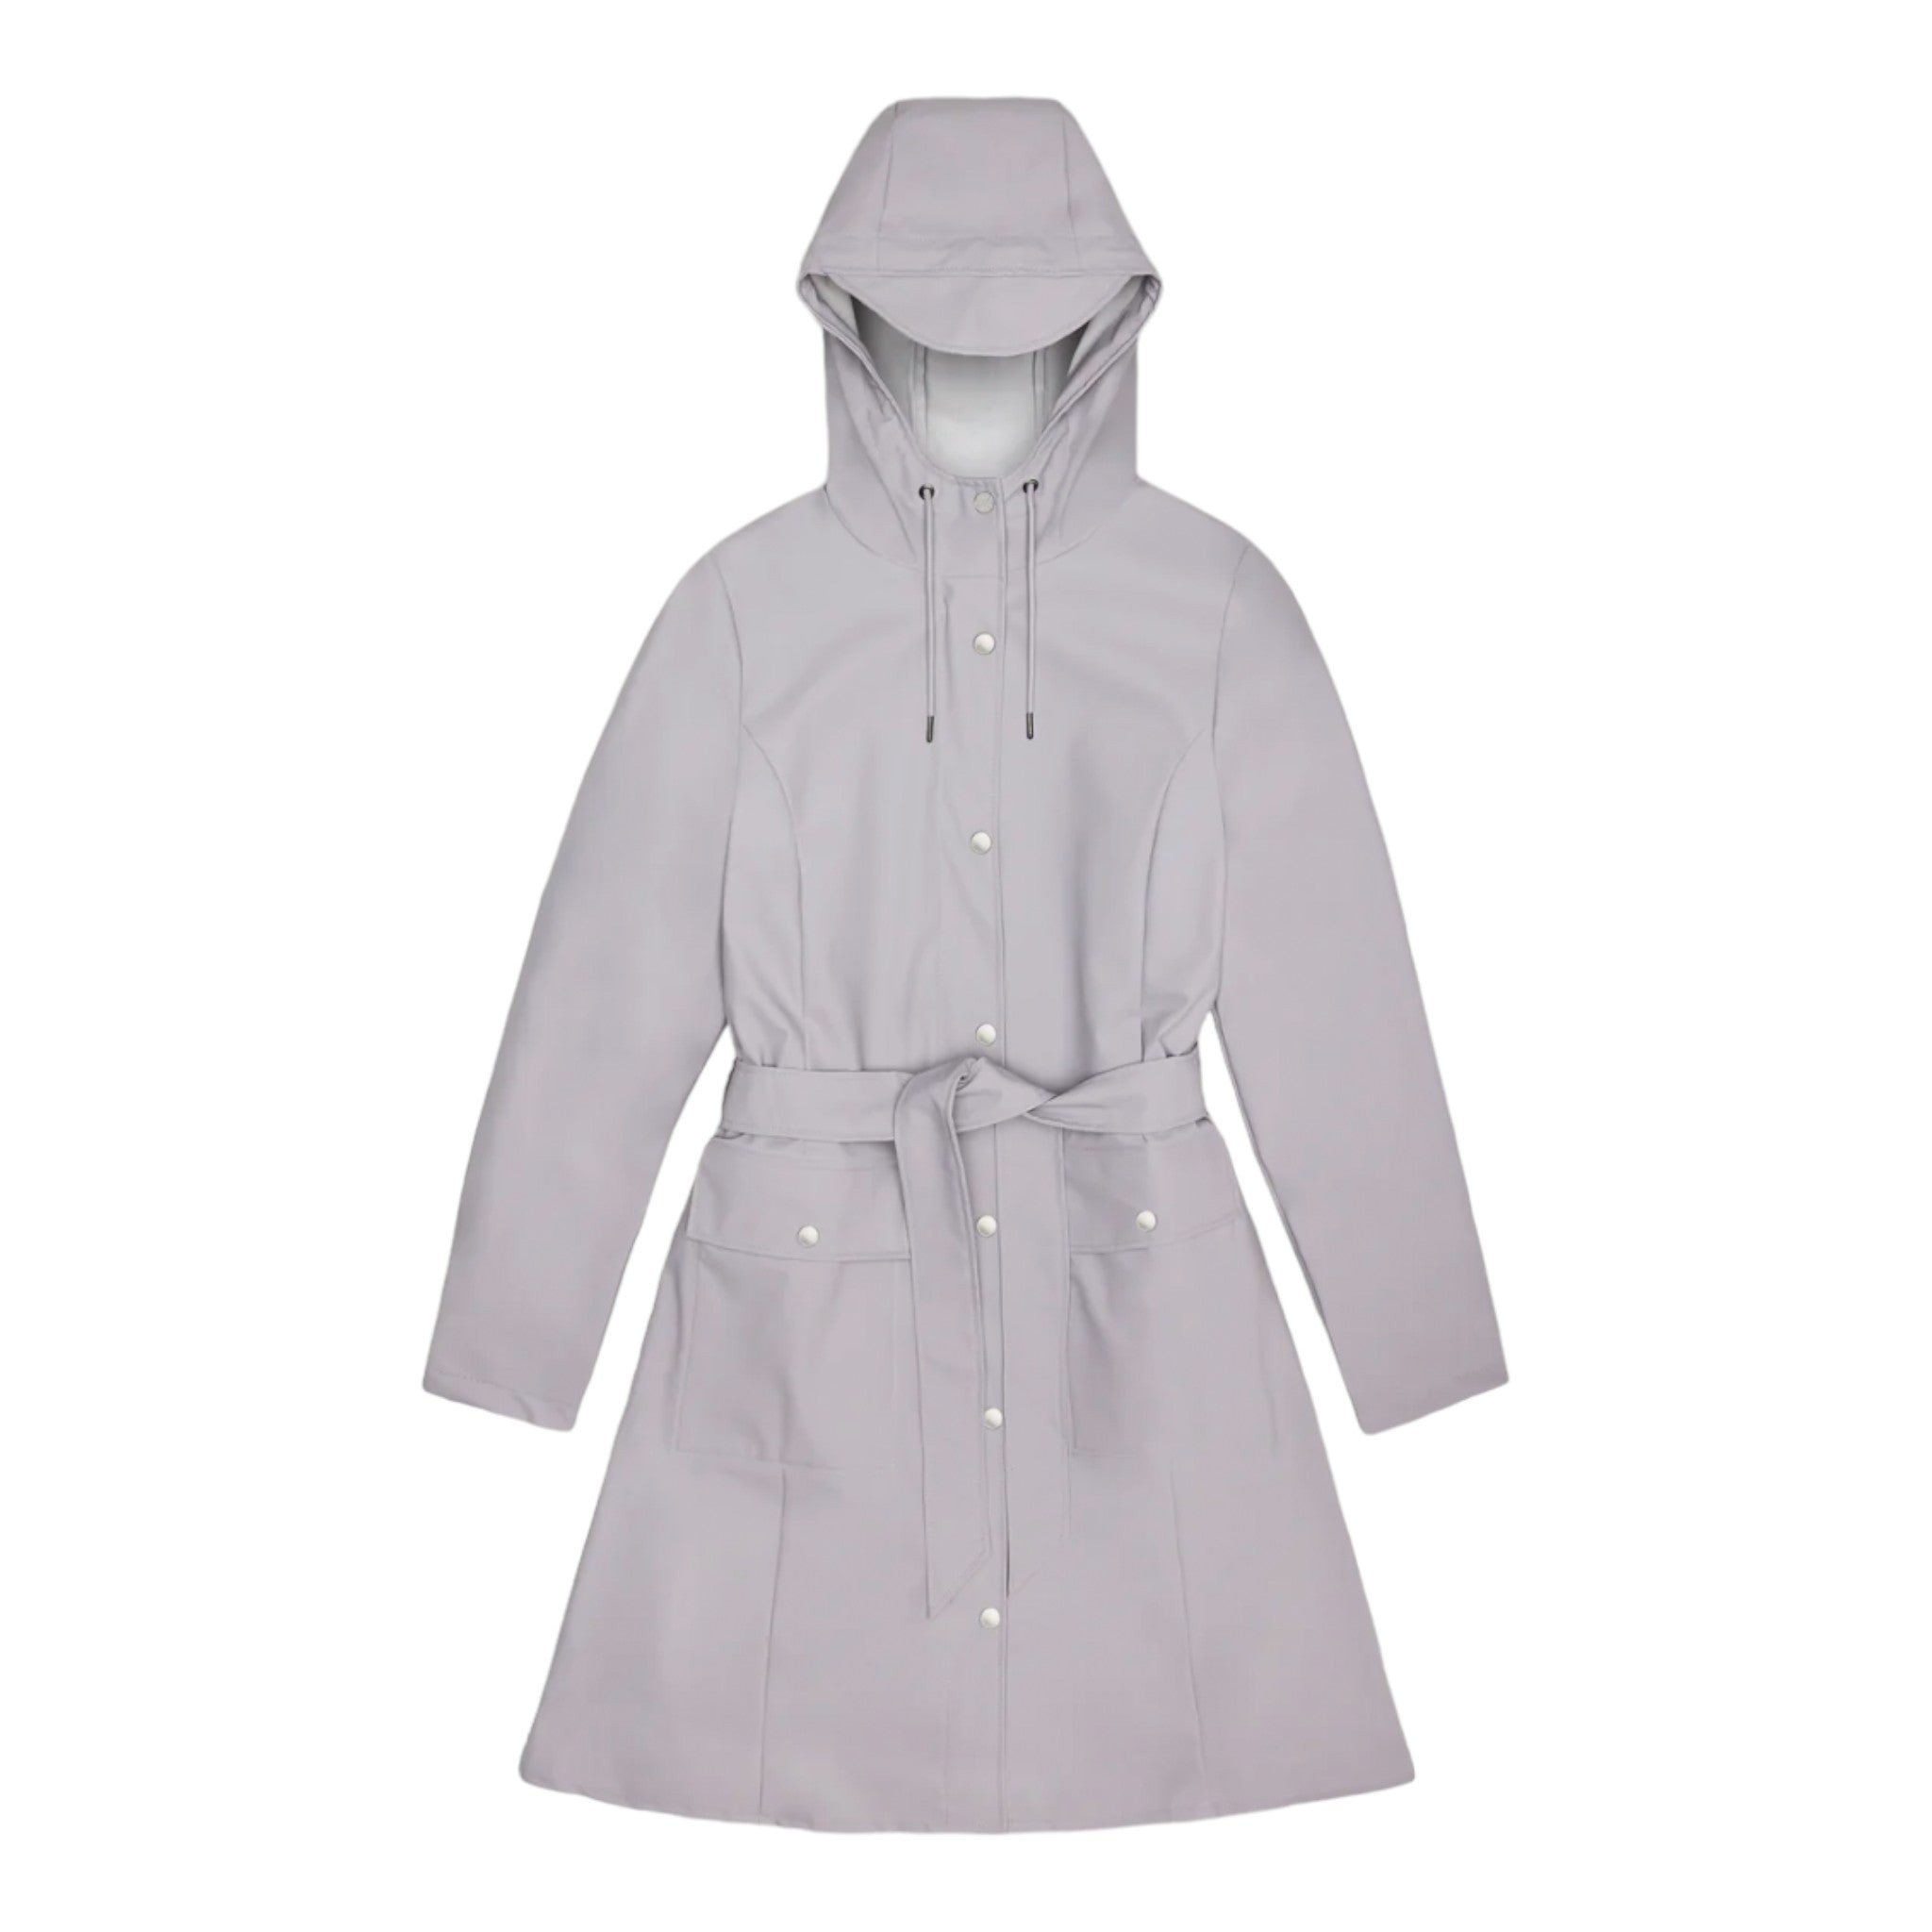 hooded, light grey trench coat style rain coat with waist tie and 2 snap closure pockets on the front